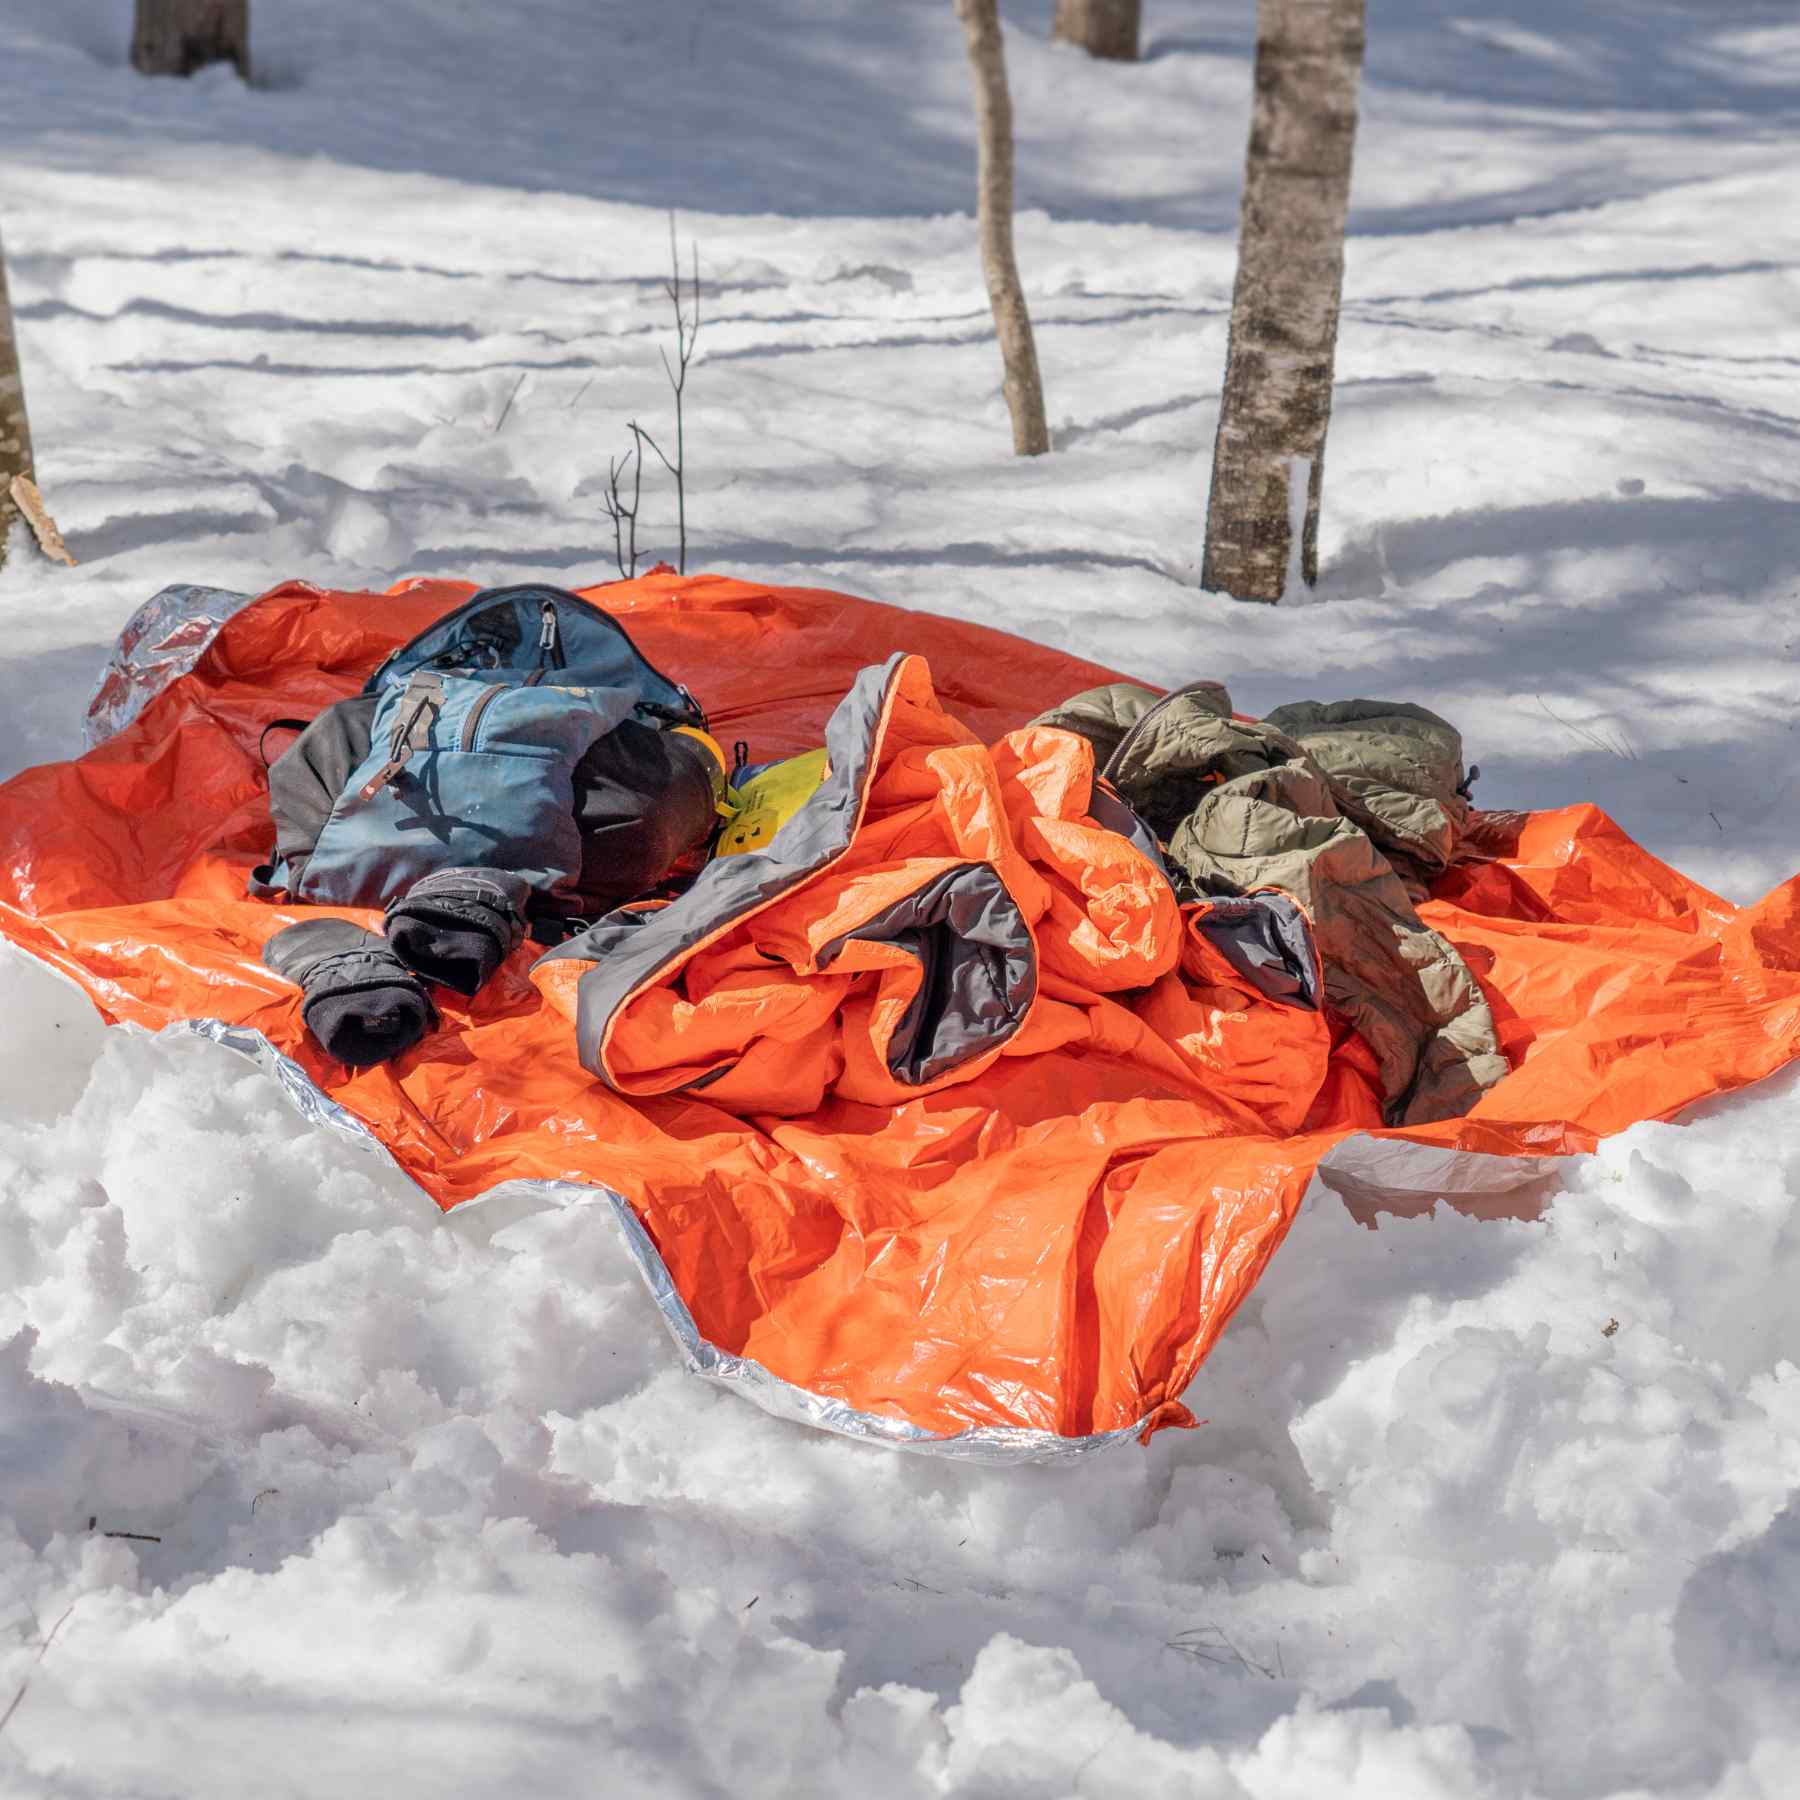 Emergency Blanket being used as tarp for gear on snow